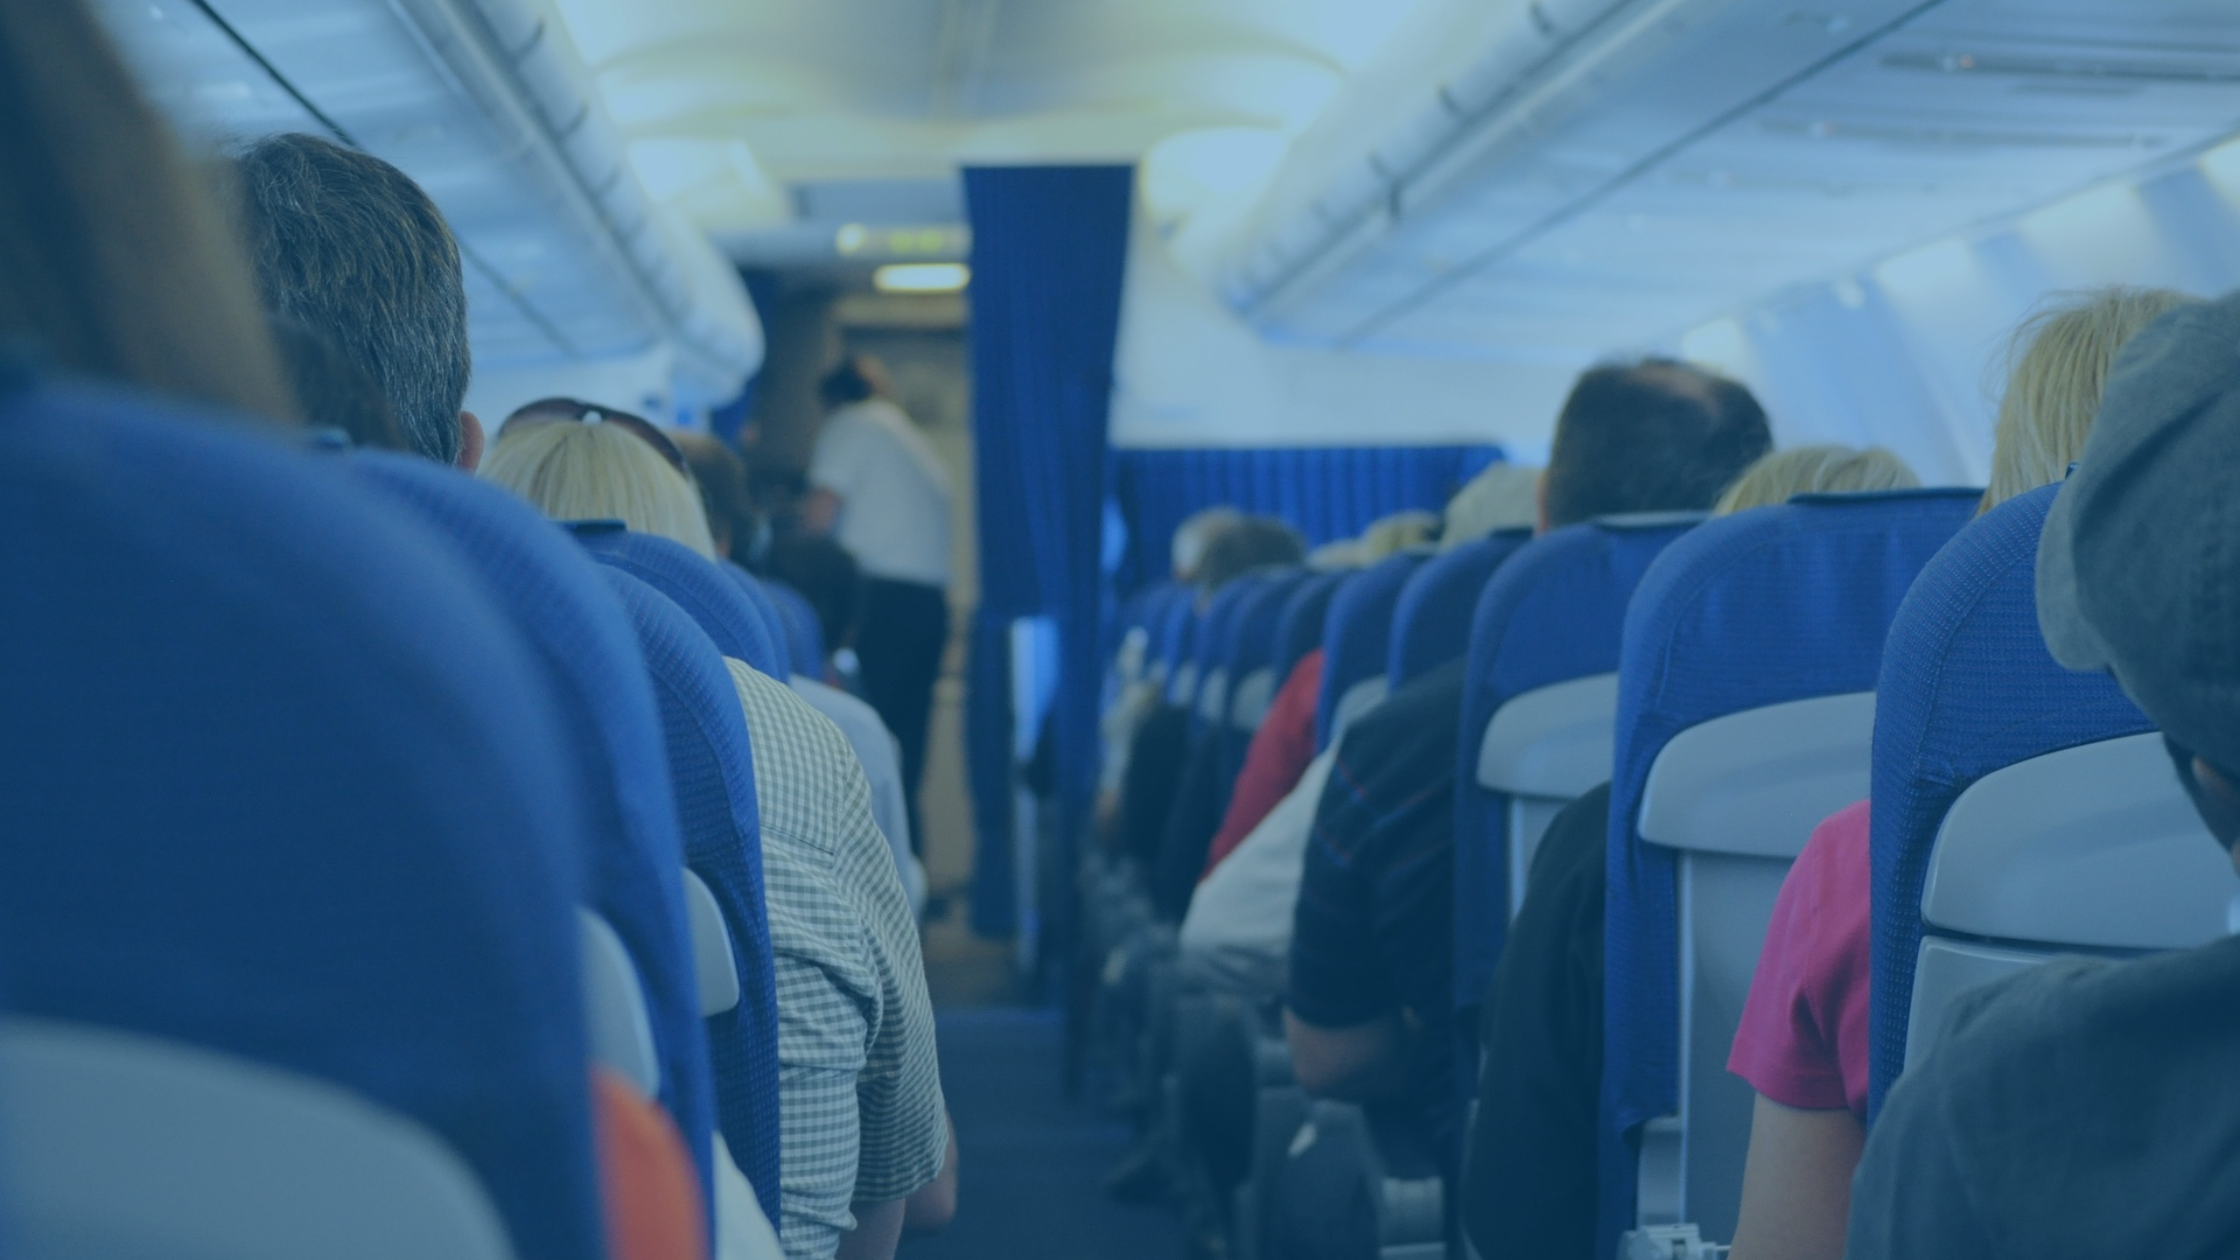 Yes, you should give up your seat on the plane